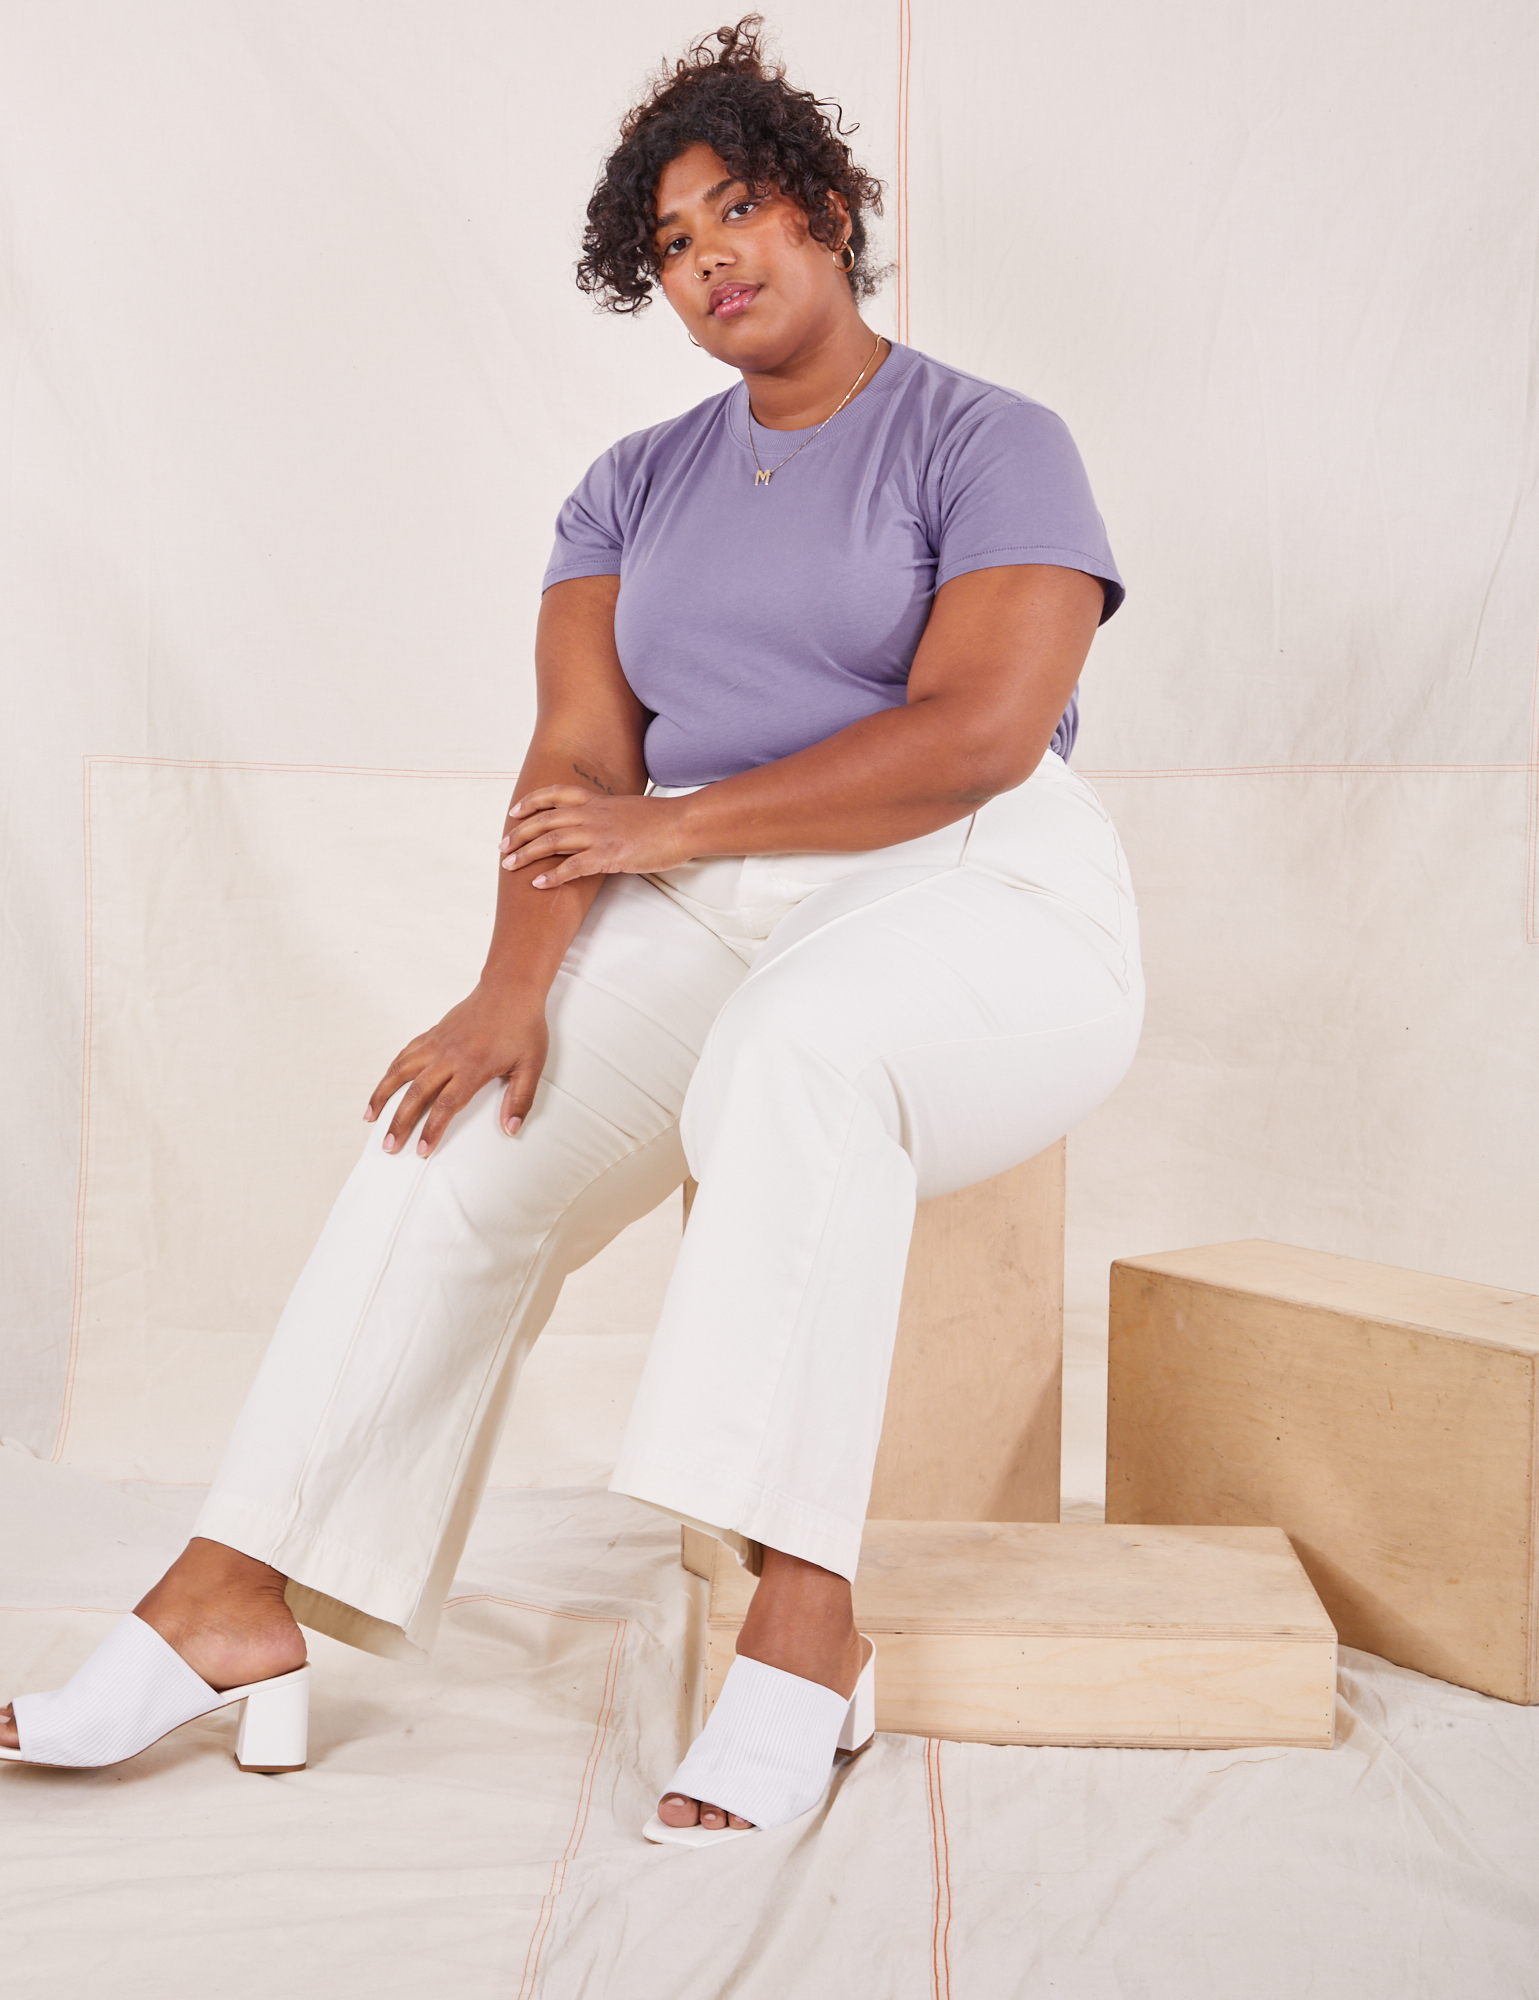 Morgan is wearing Organic Vintage Tee in Faded Grape and vintage off-white Western Pants